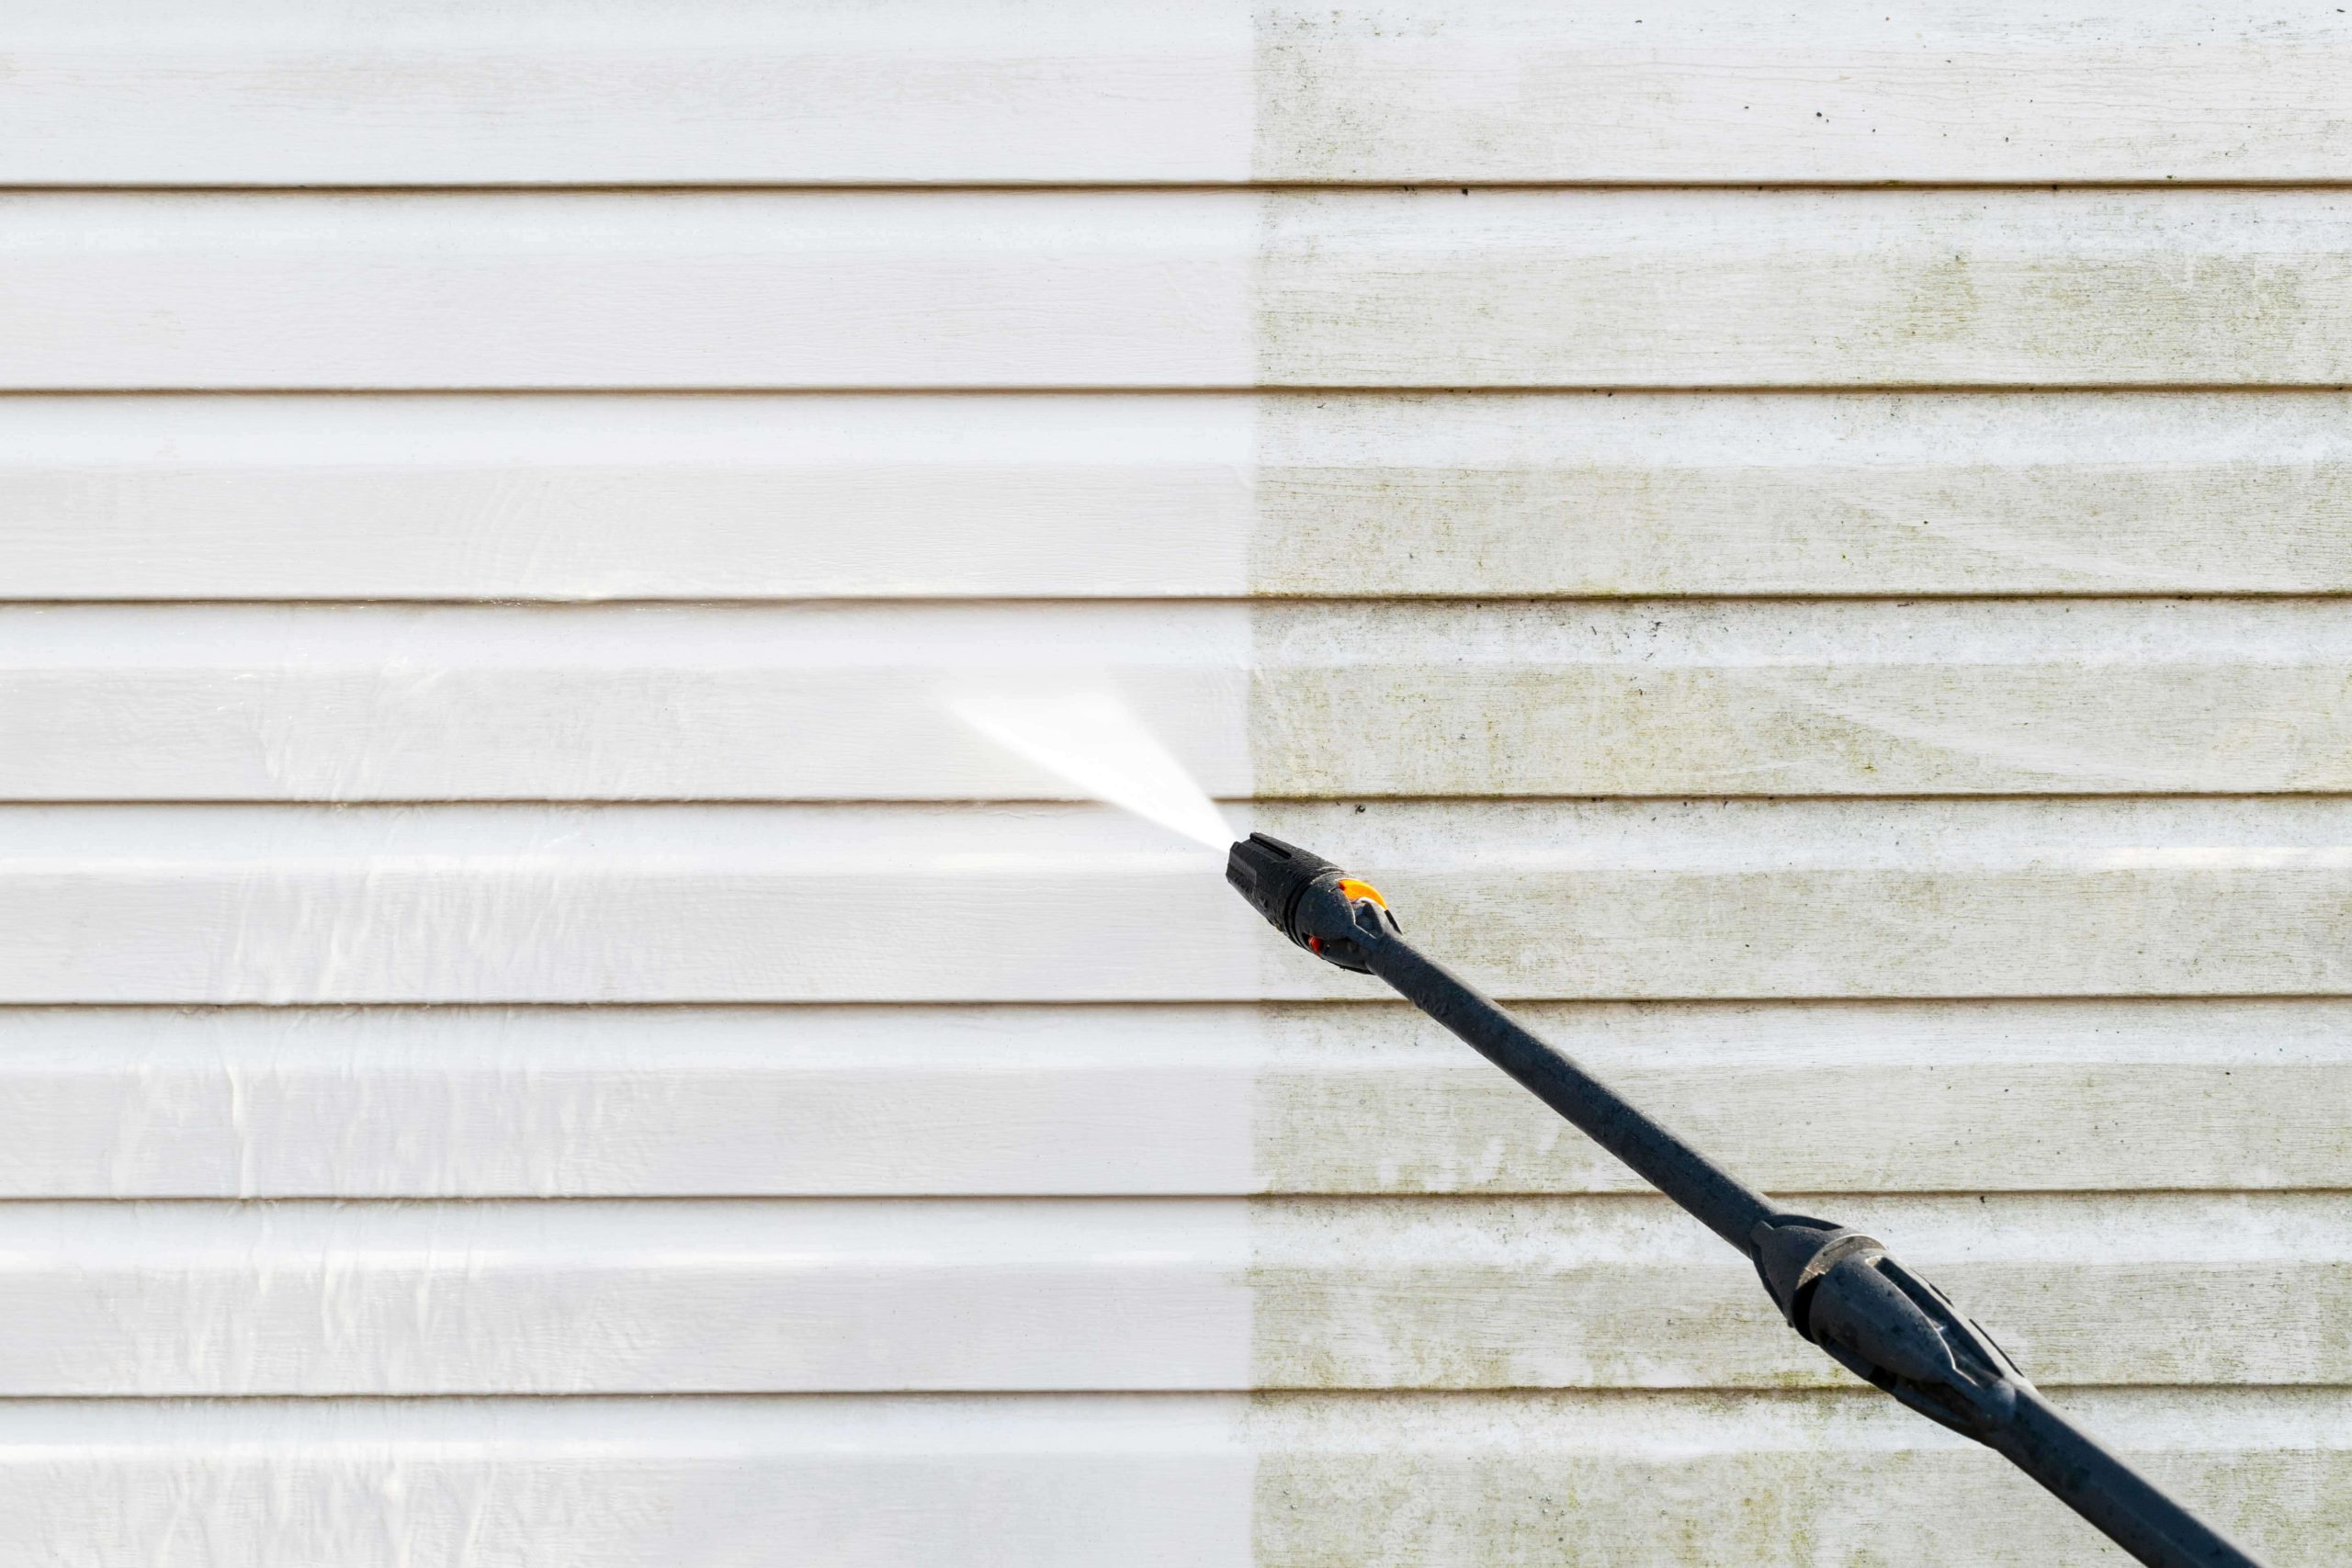 Residential exterior power washing in San Jose, CA: Before and after transformation.